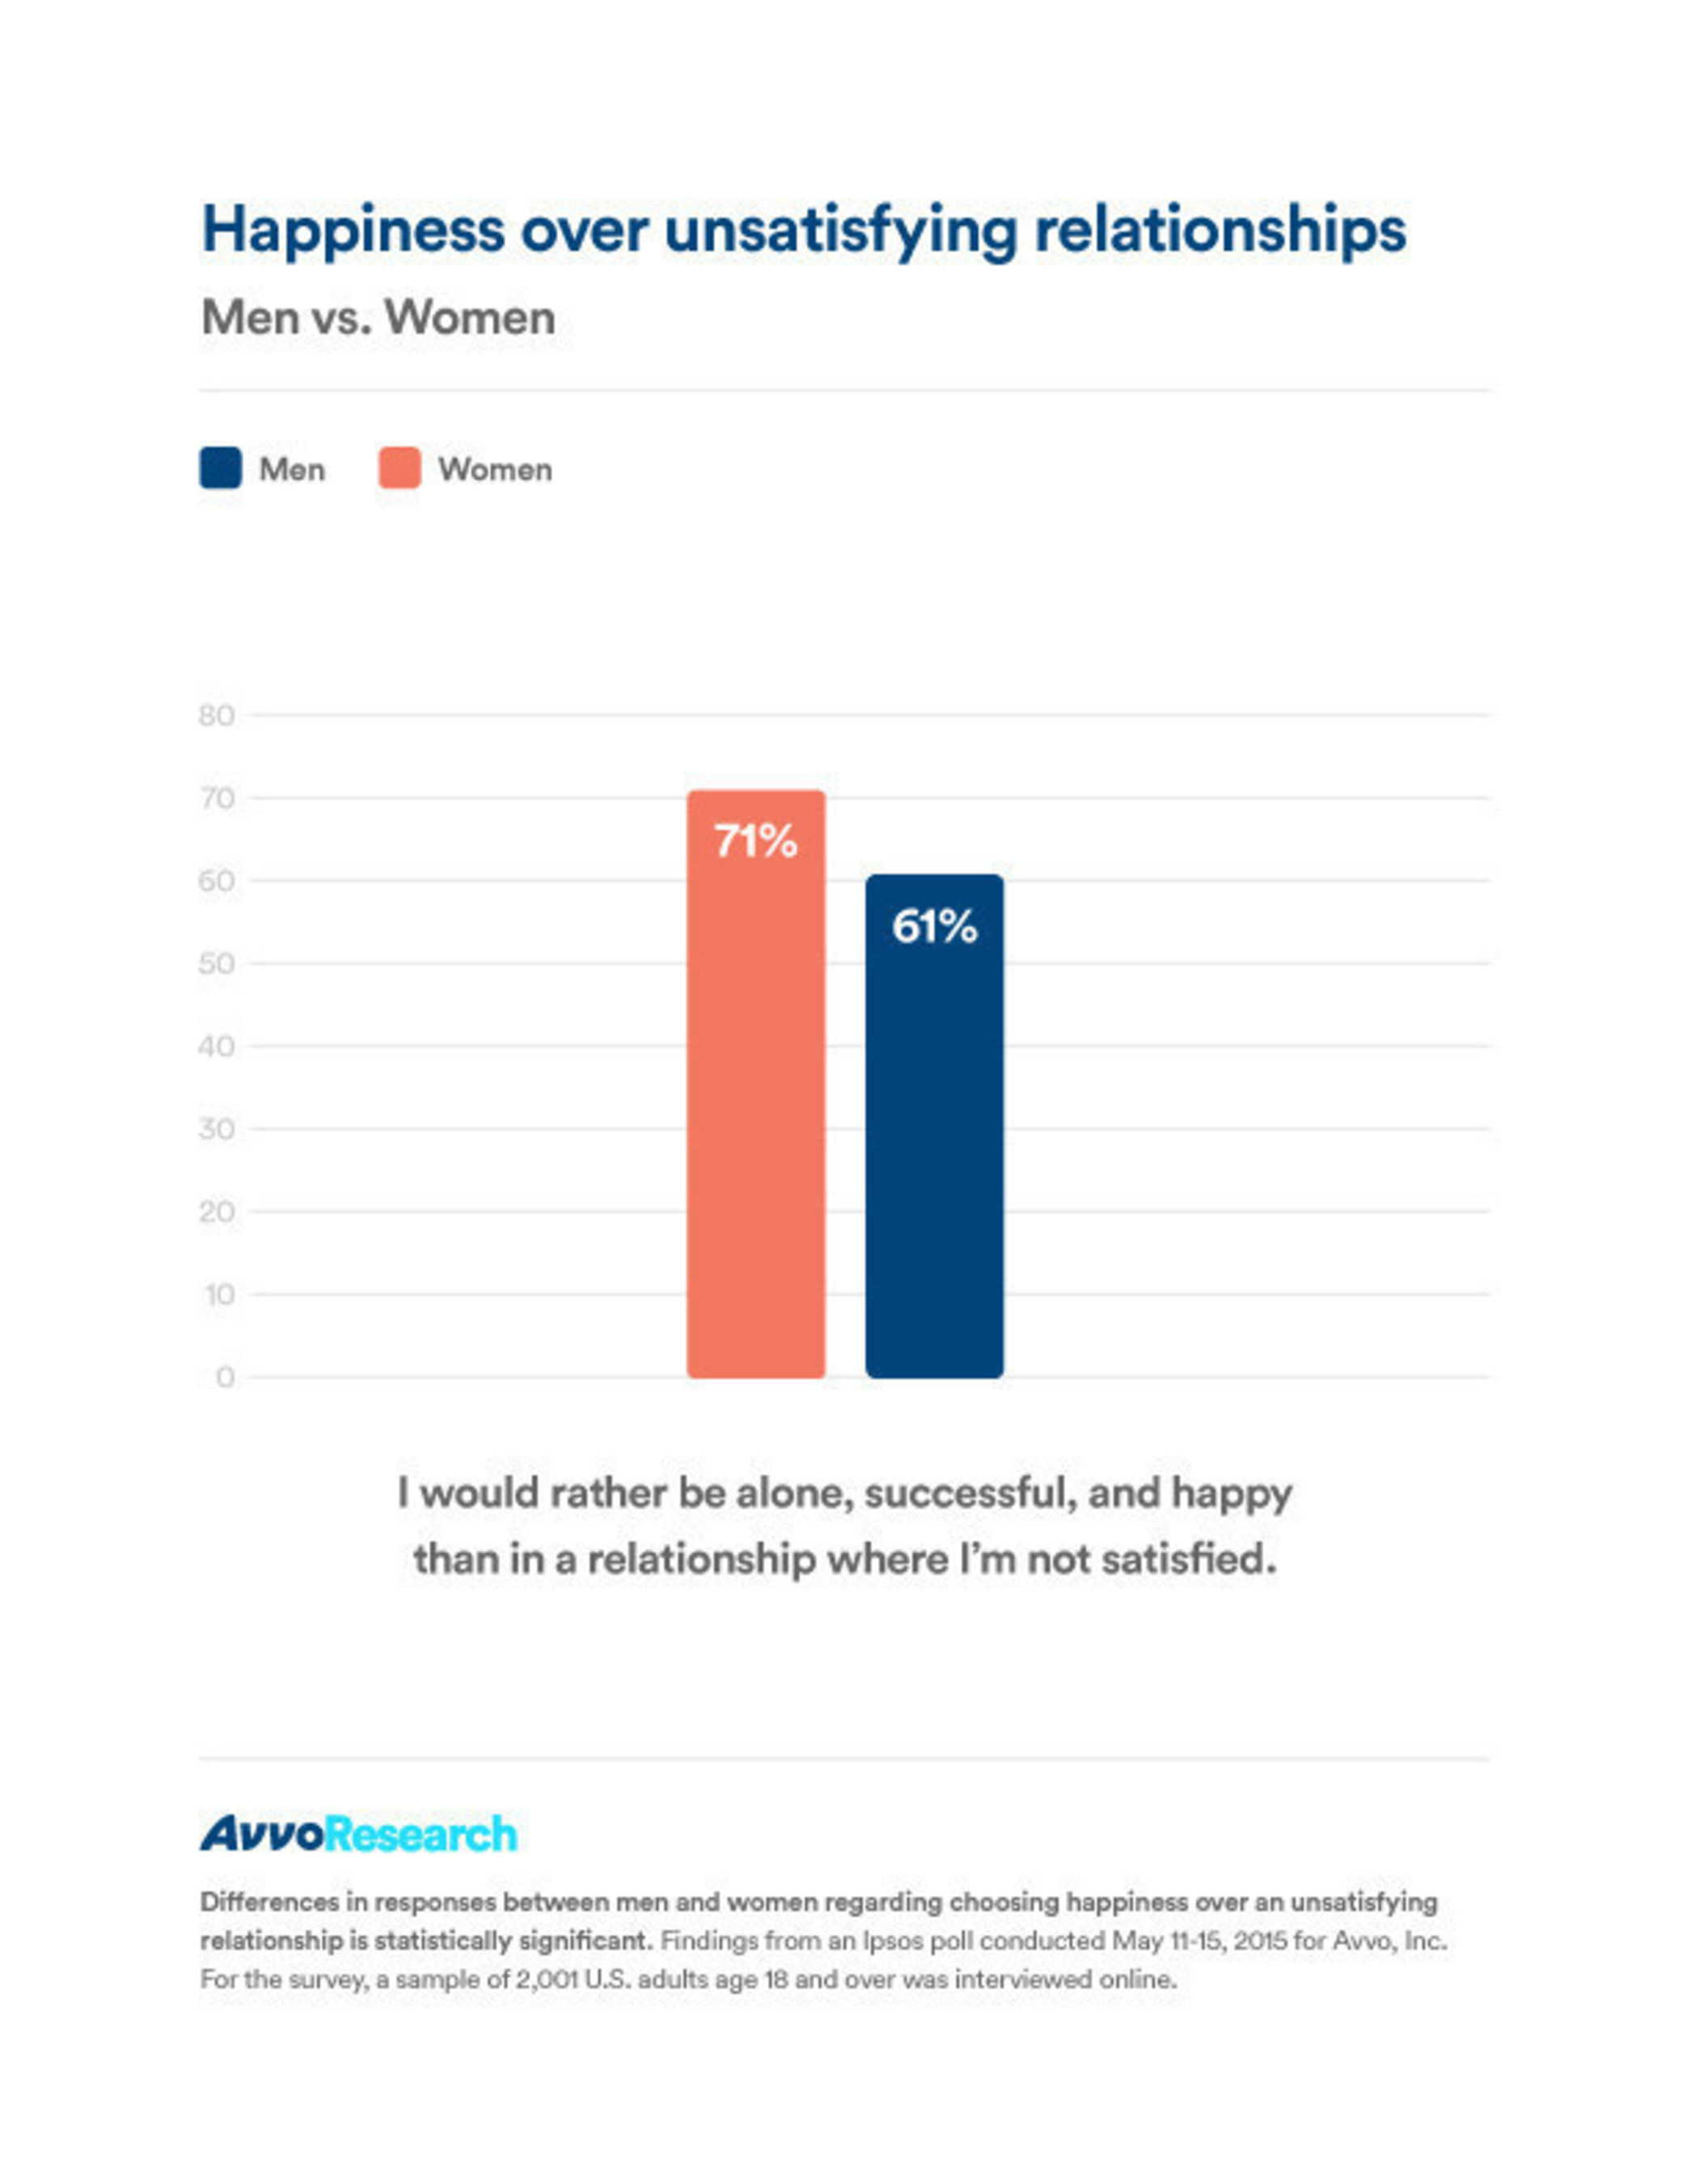 Happiness over unsatisfying relationships: Men vs. Women. "I would rather be alone, successful, and happy than in a relationship where I'm not satisfied." Avvo Research 2015